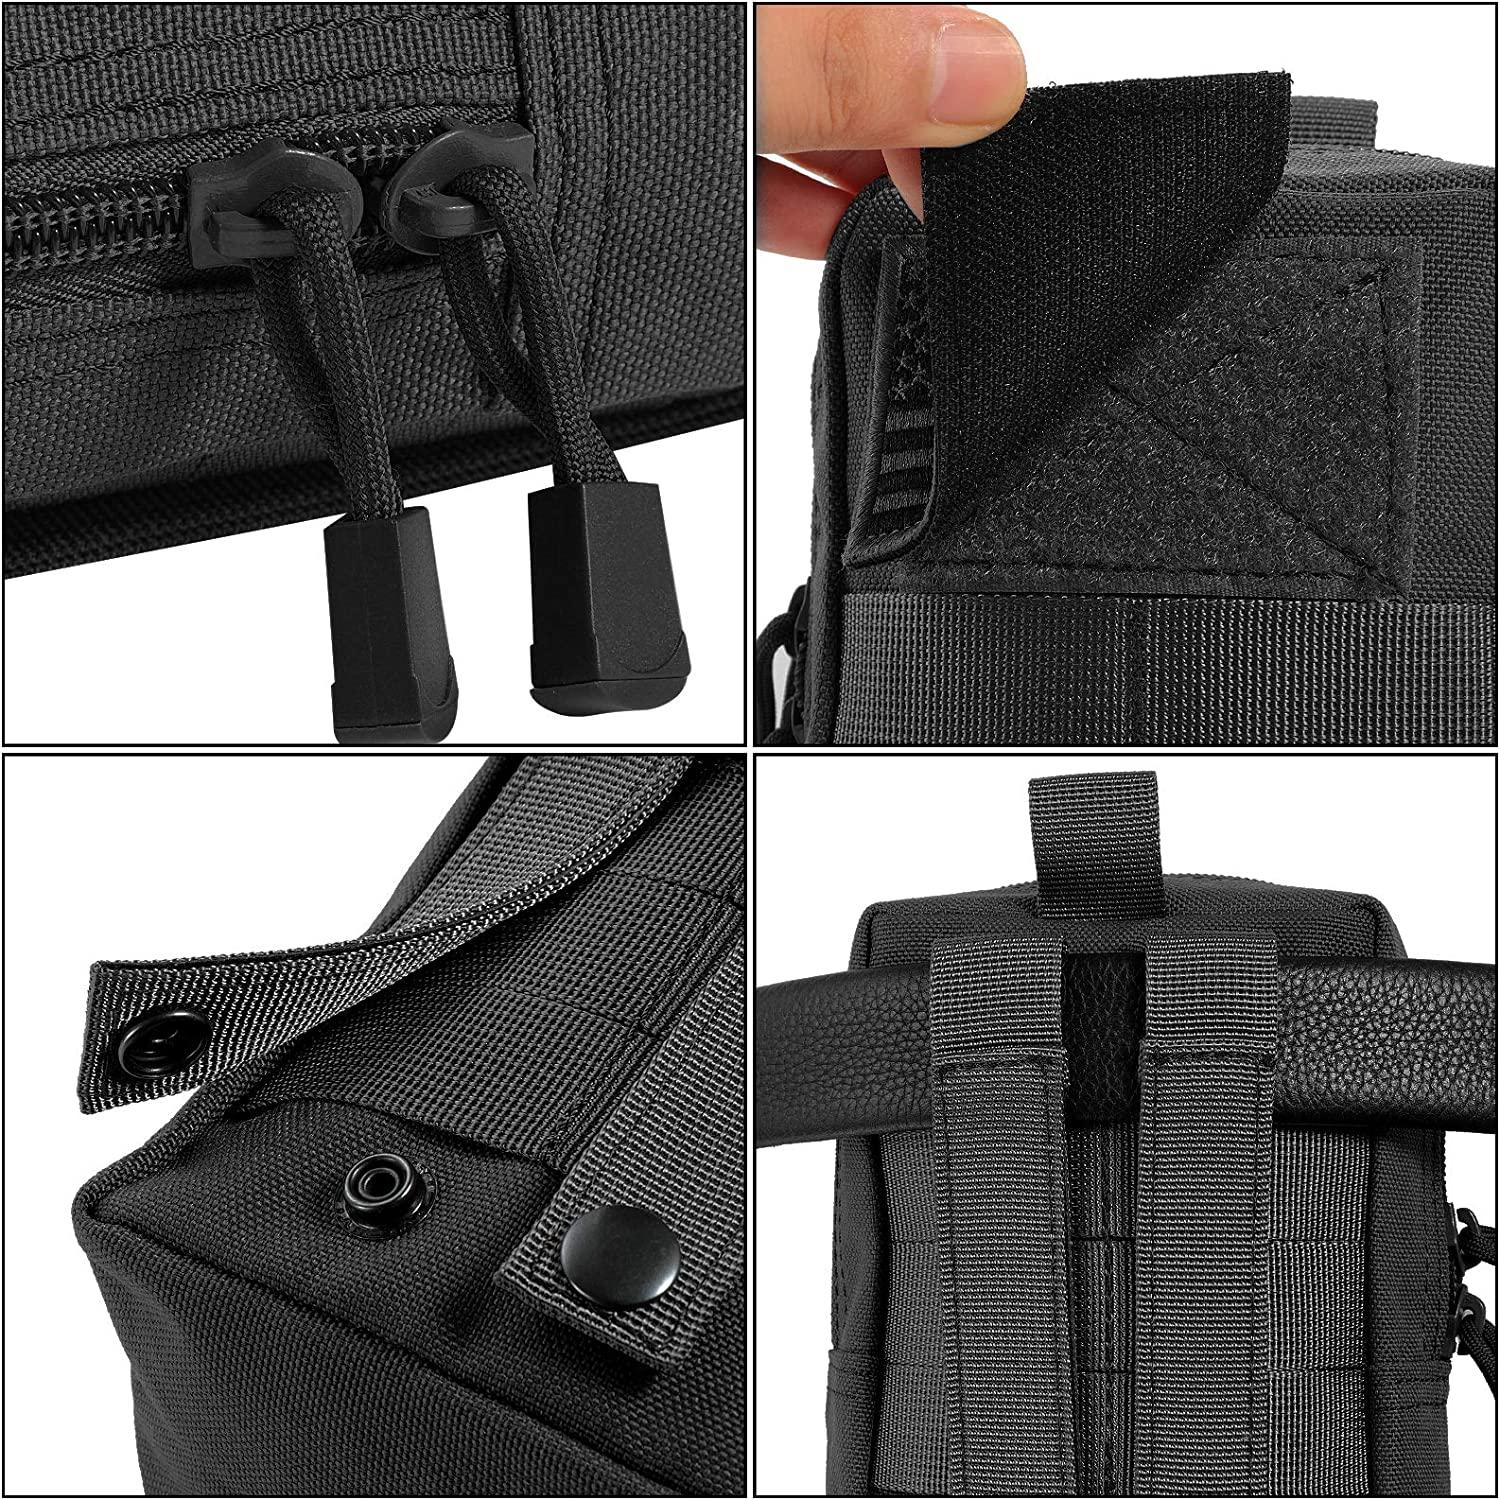 FRTKK 2 Pack Molle Pouches - Tactical Compact Water-Resistant EDC Pouch ...